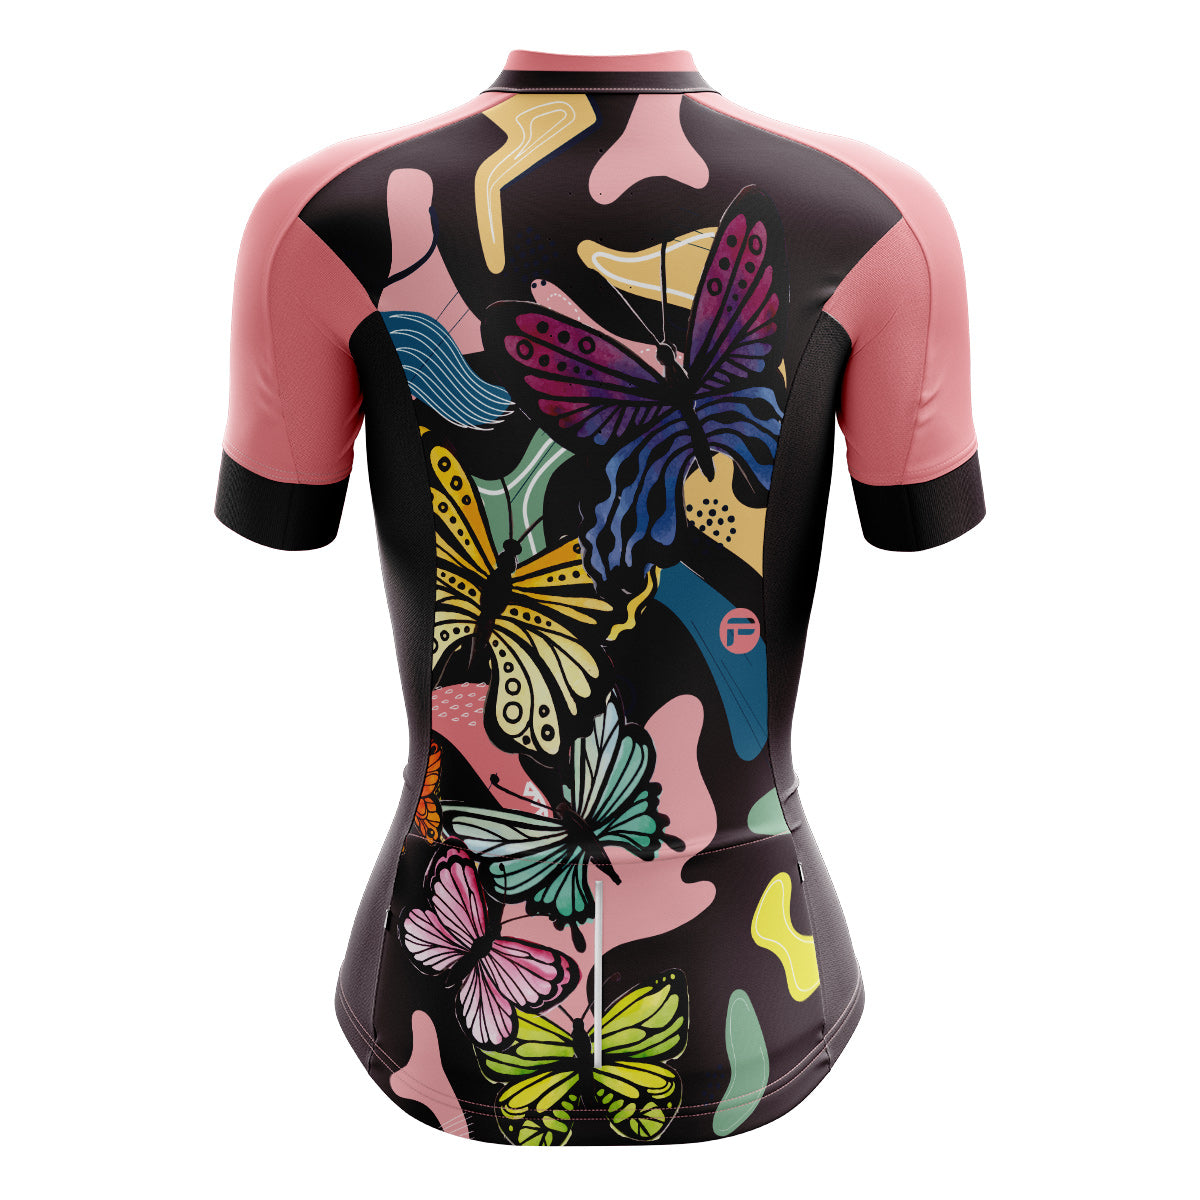 Riding with Butterflies | Frelsi Cycling Jersey